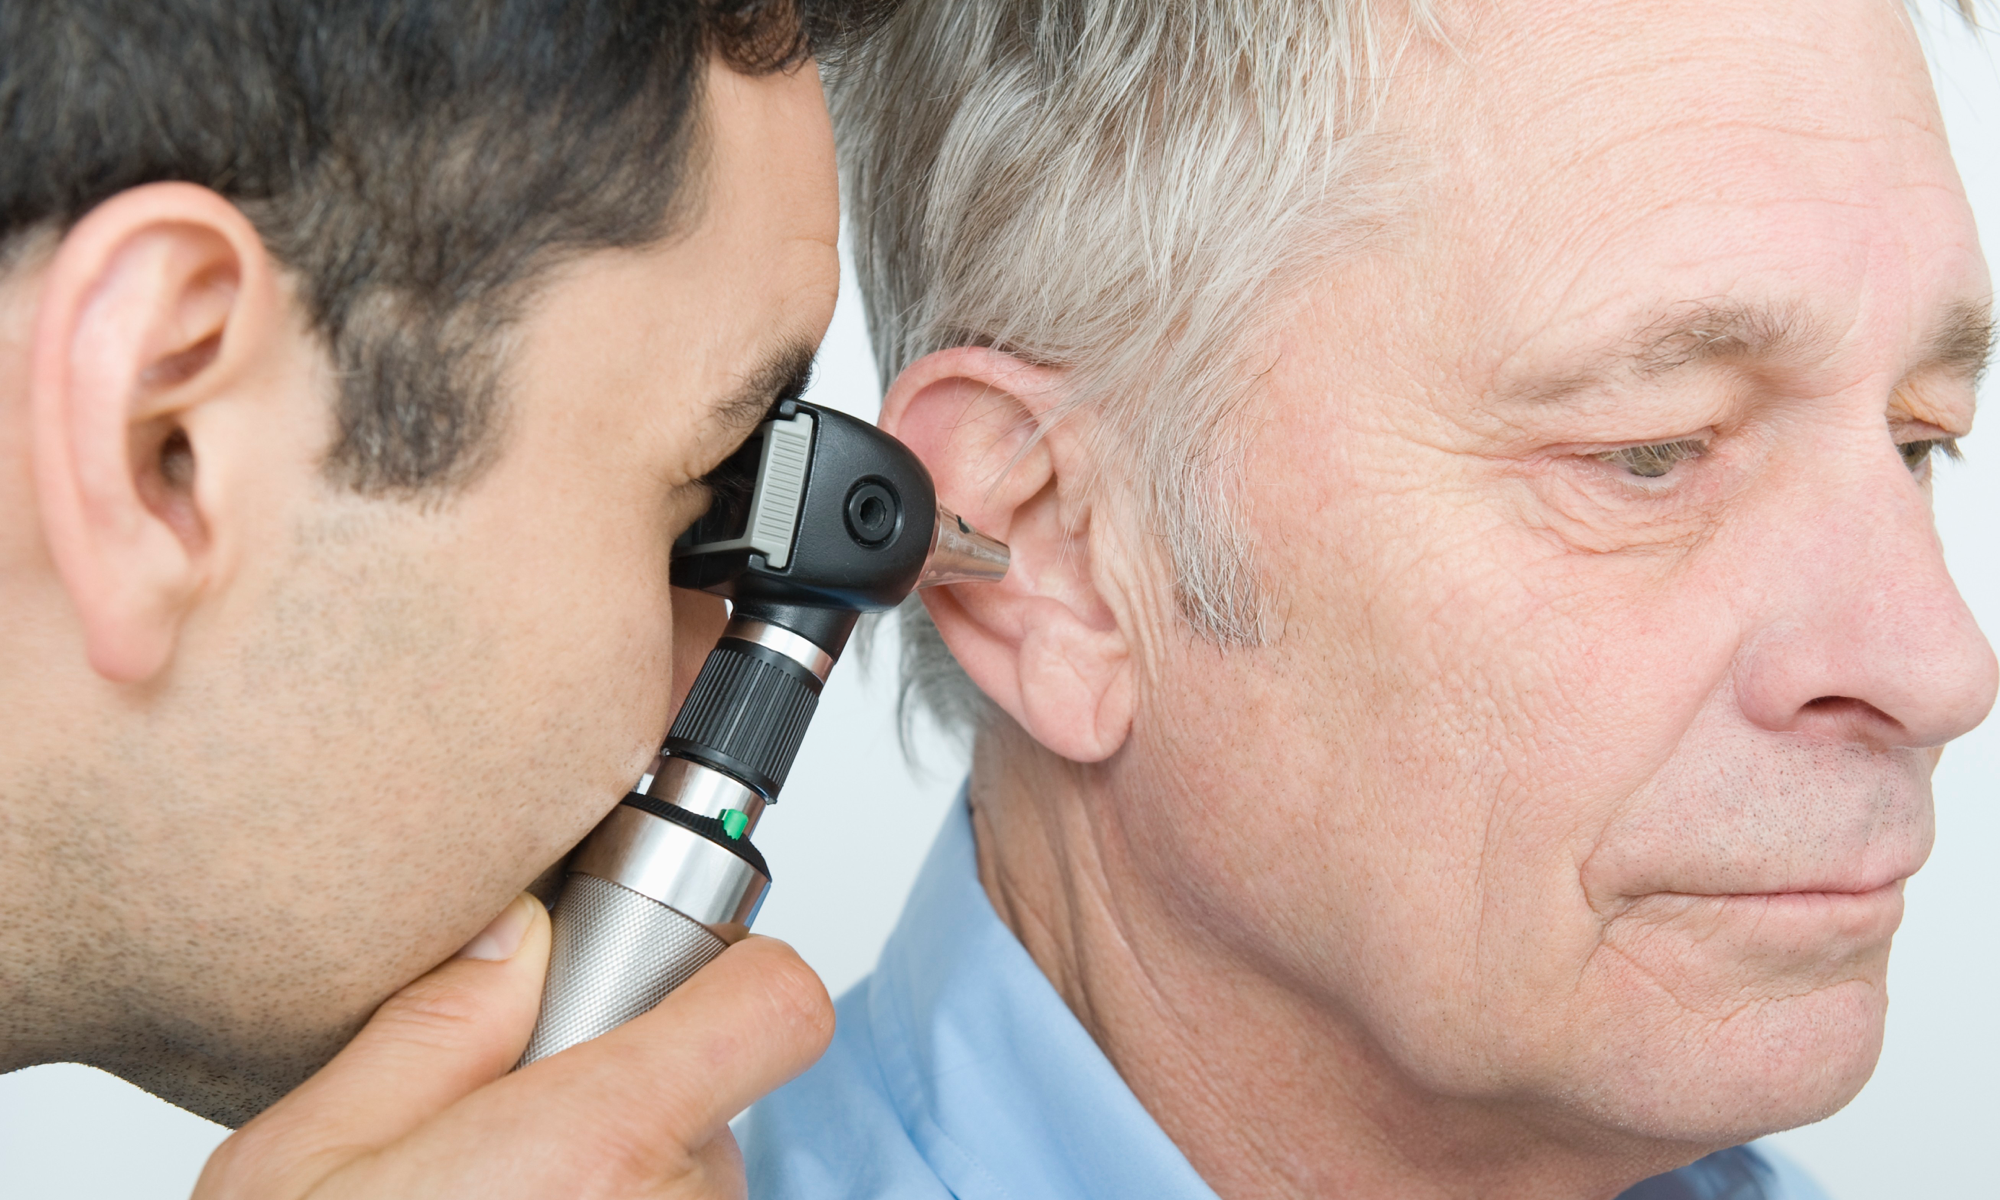 An image of one man peering into another man's ear.